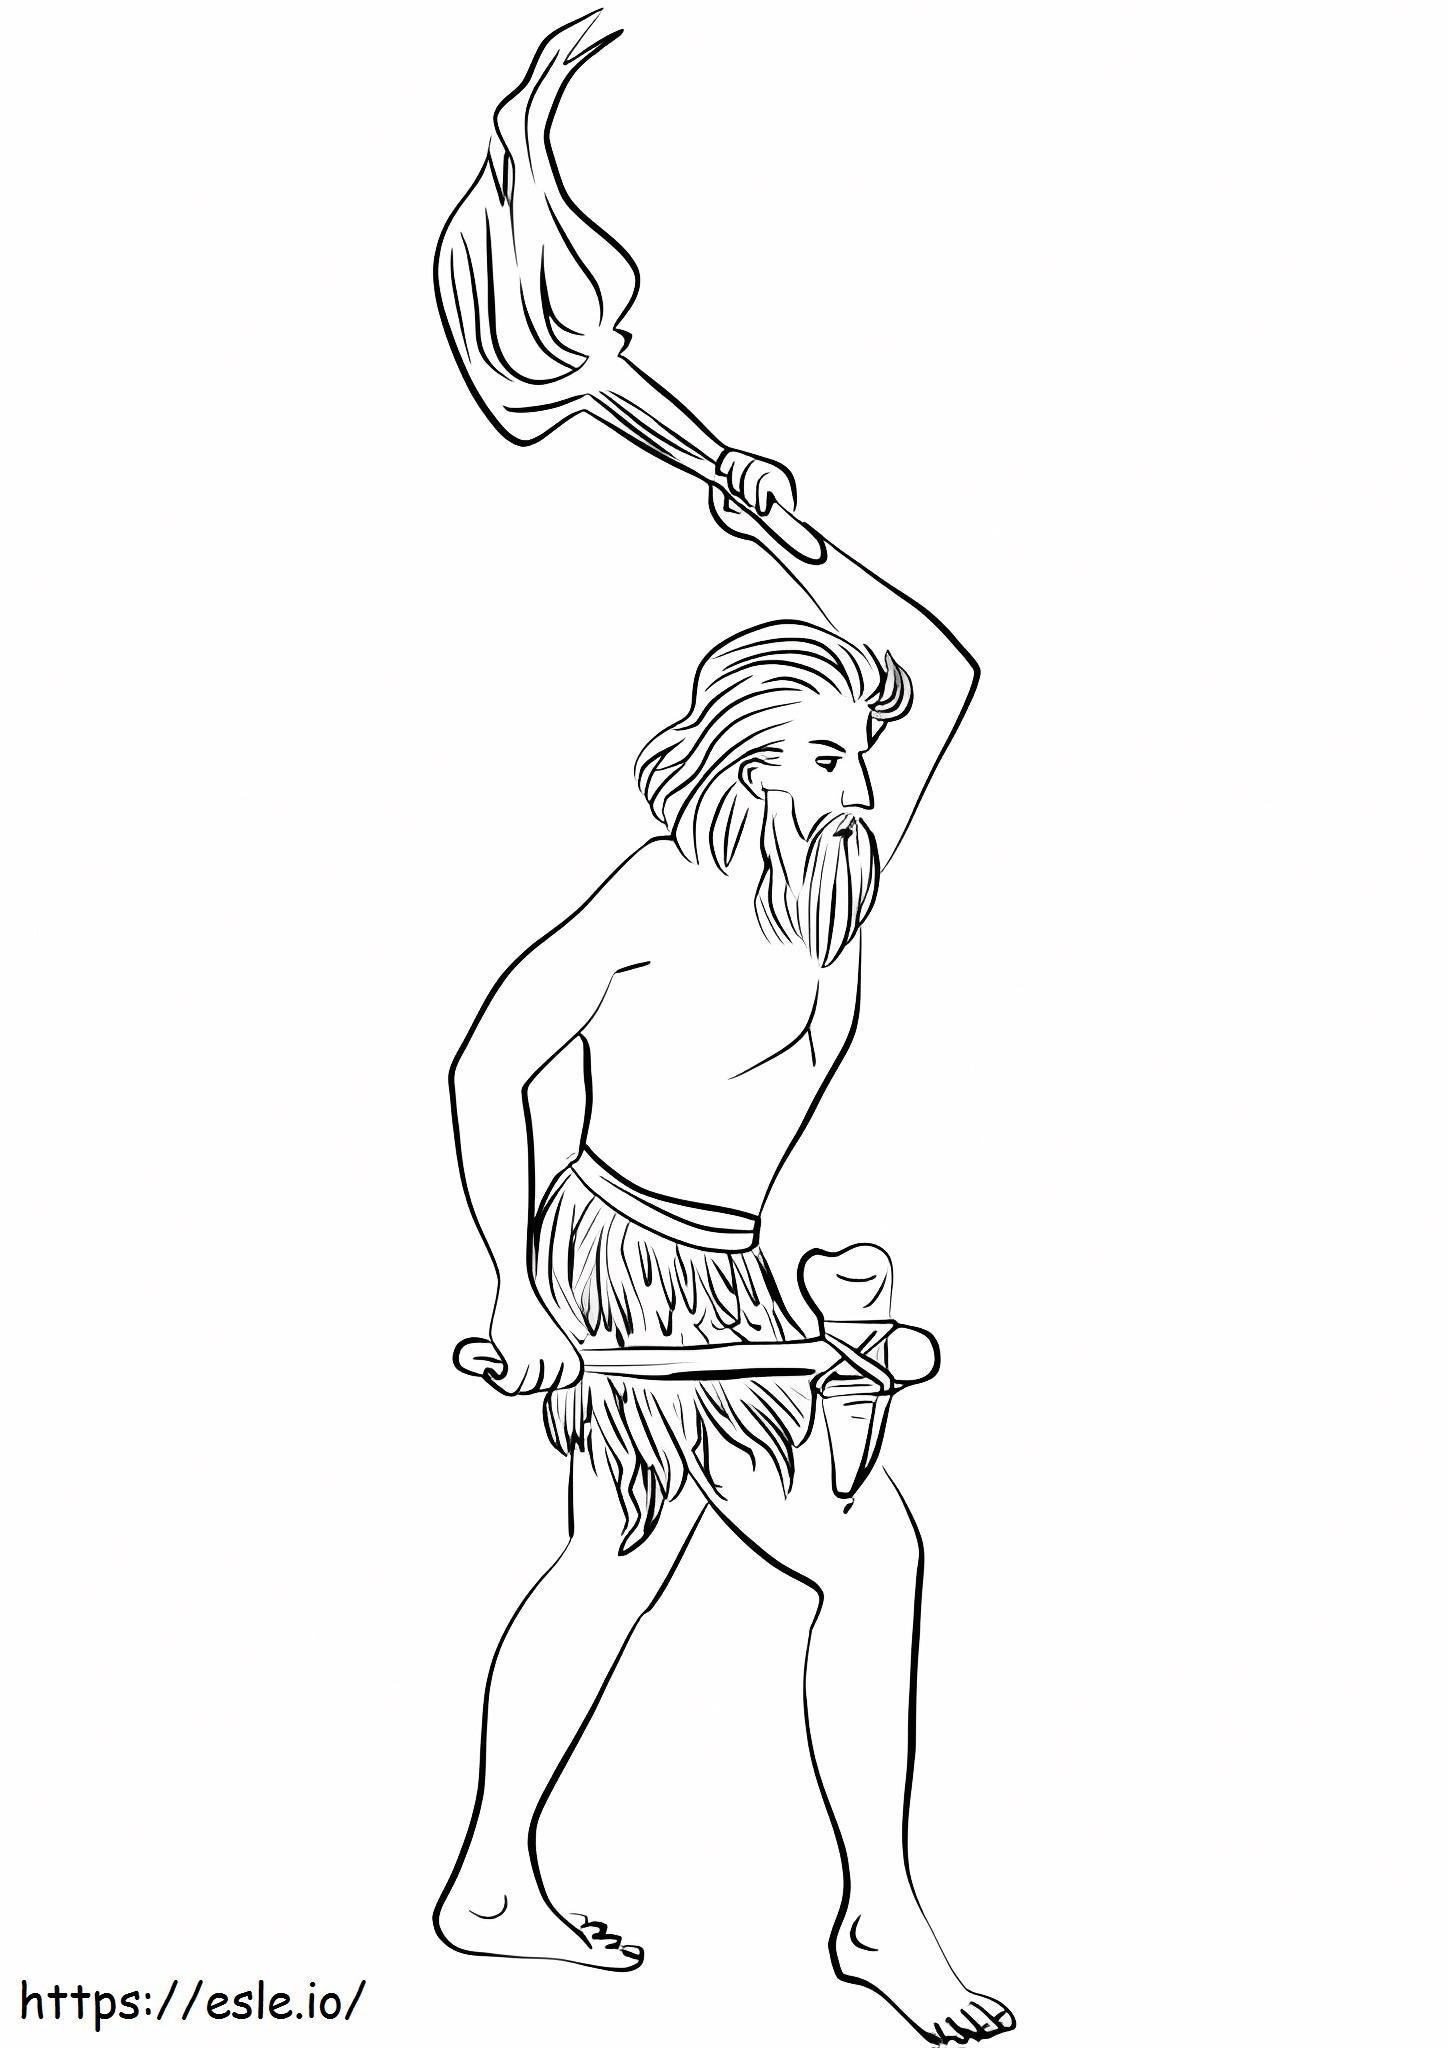 Caveman With Ax And Torch coloring page